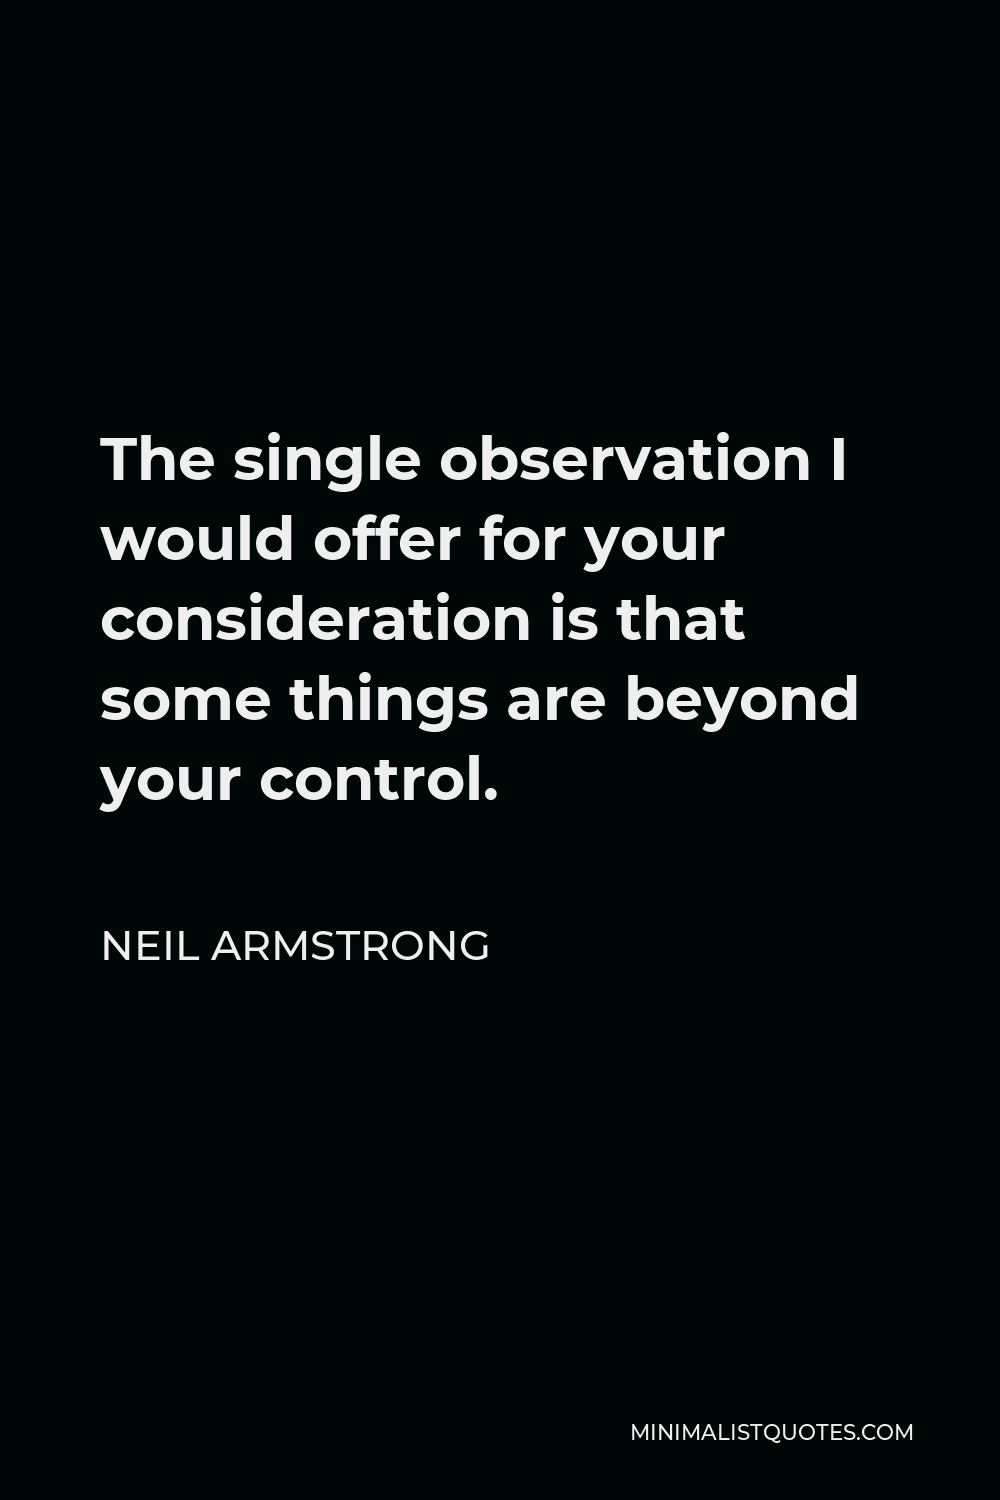 Neil Armstrong Quote - The single observation I would offer for your consideration is that some things are beyond your control.